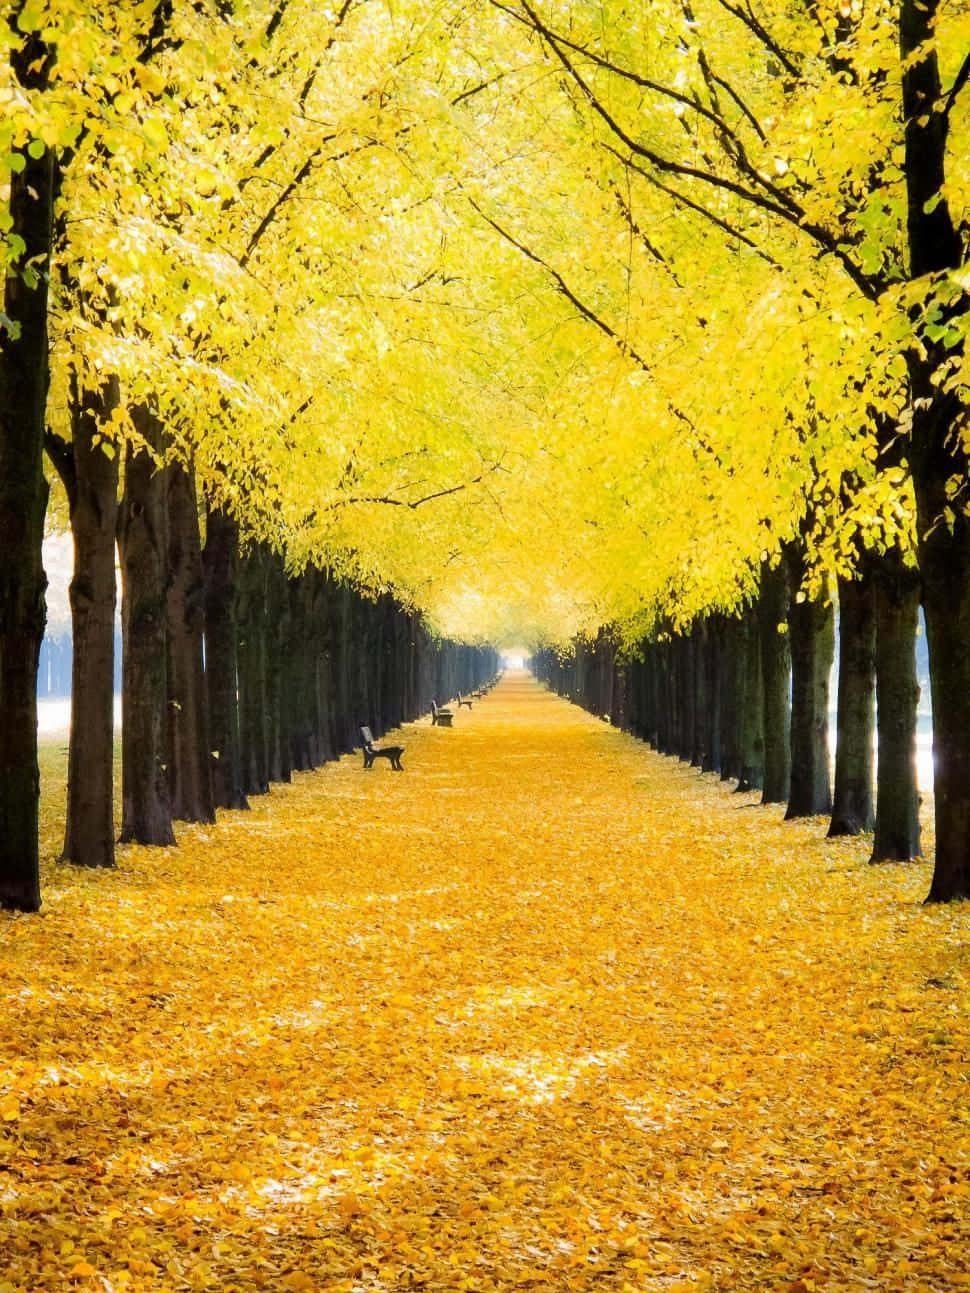 Mesmerizing Yellow Leaves in Autumn Wallpaper